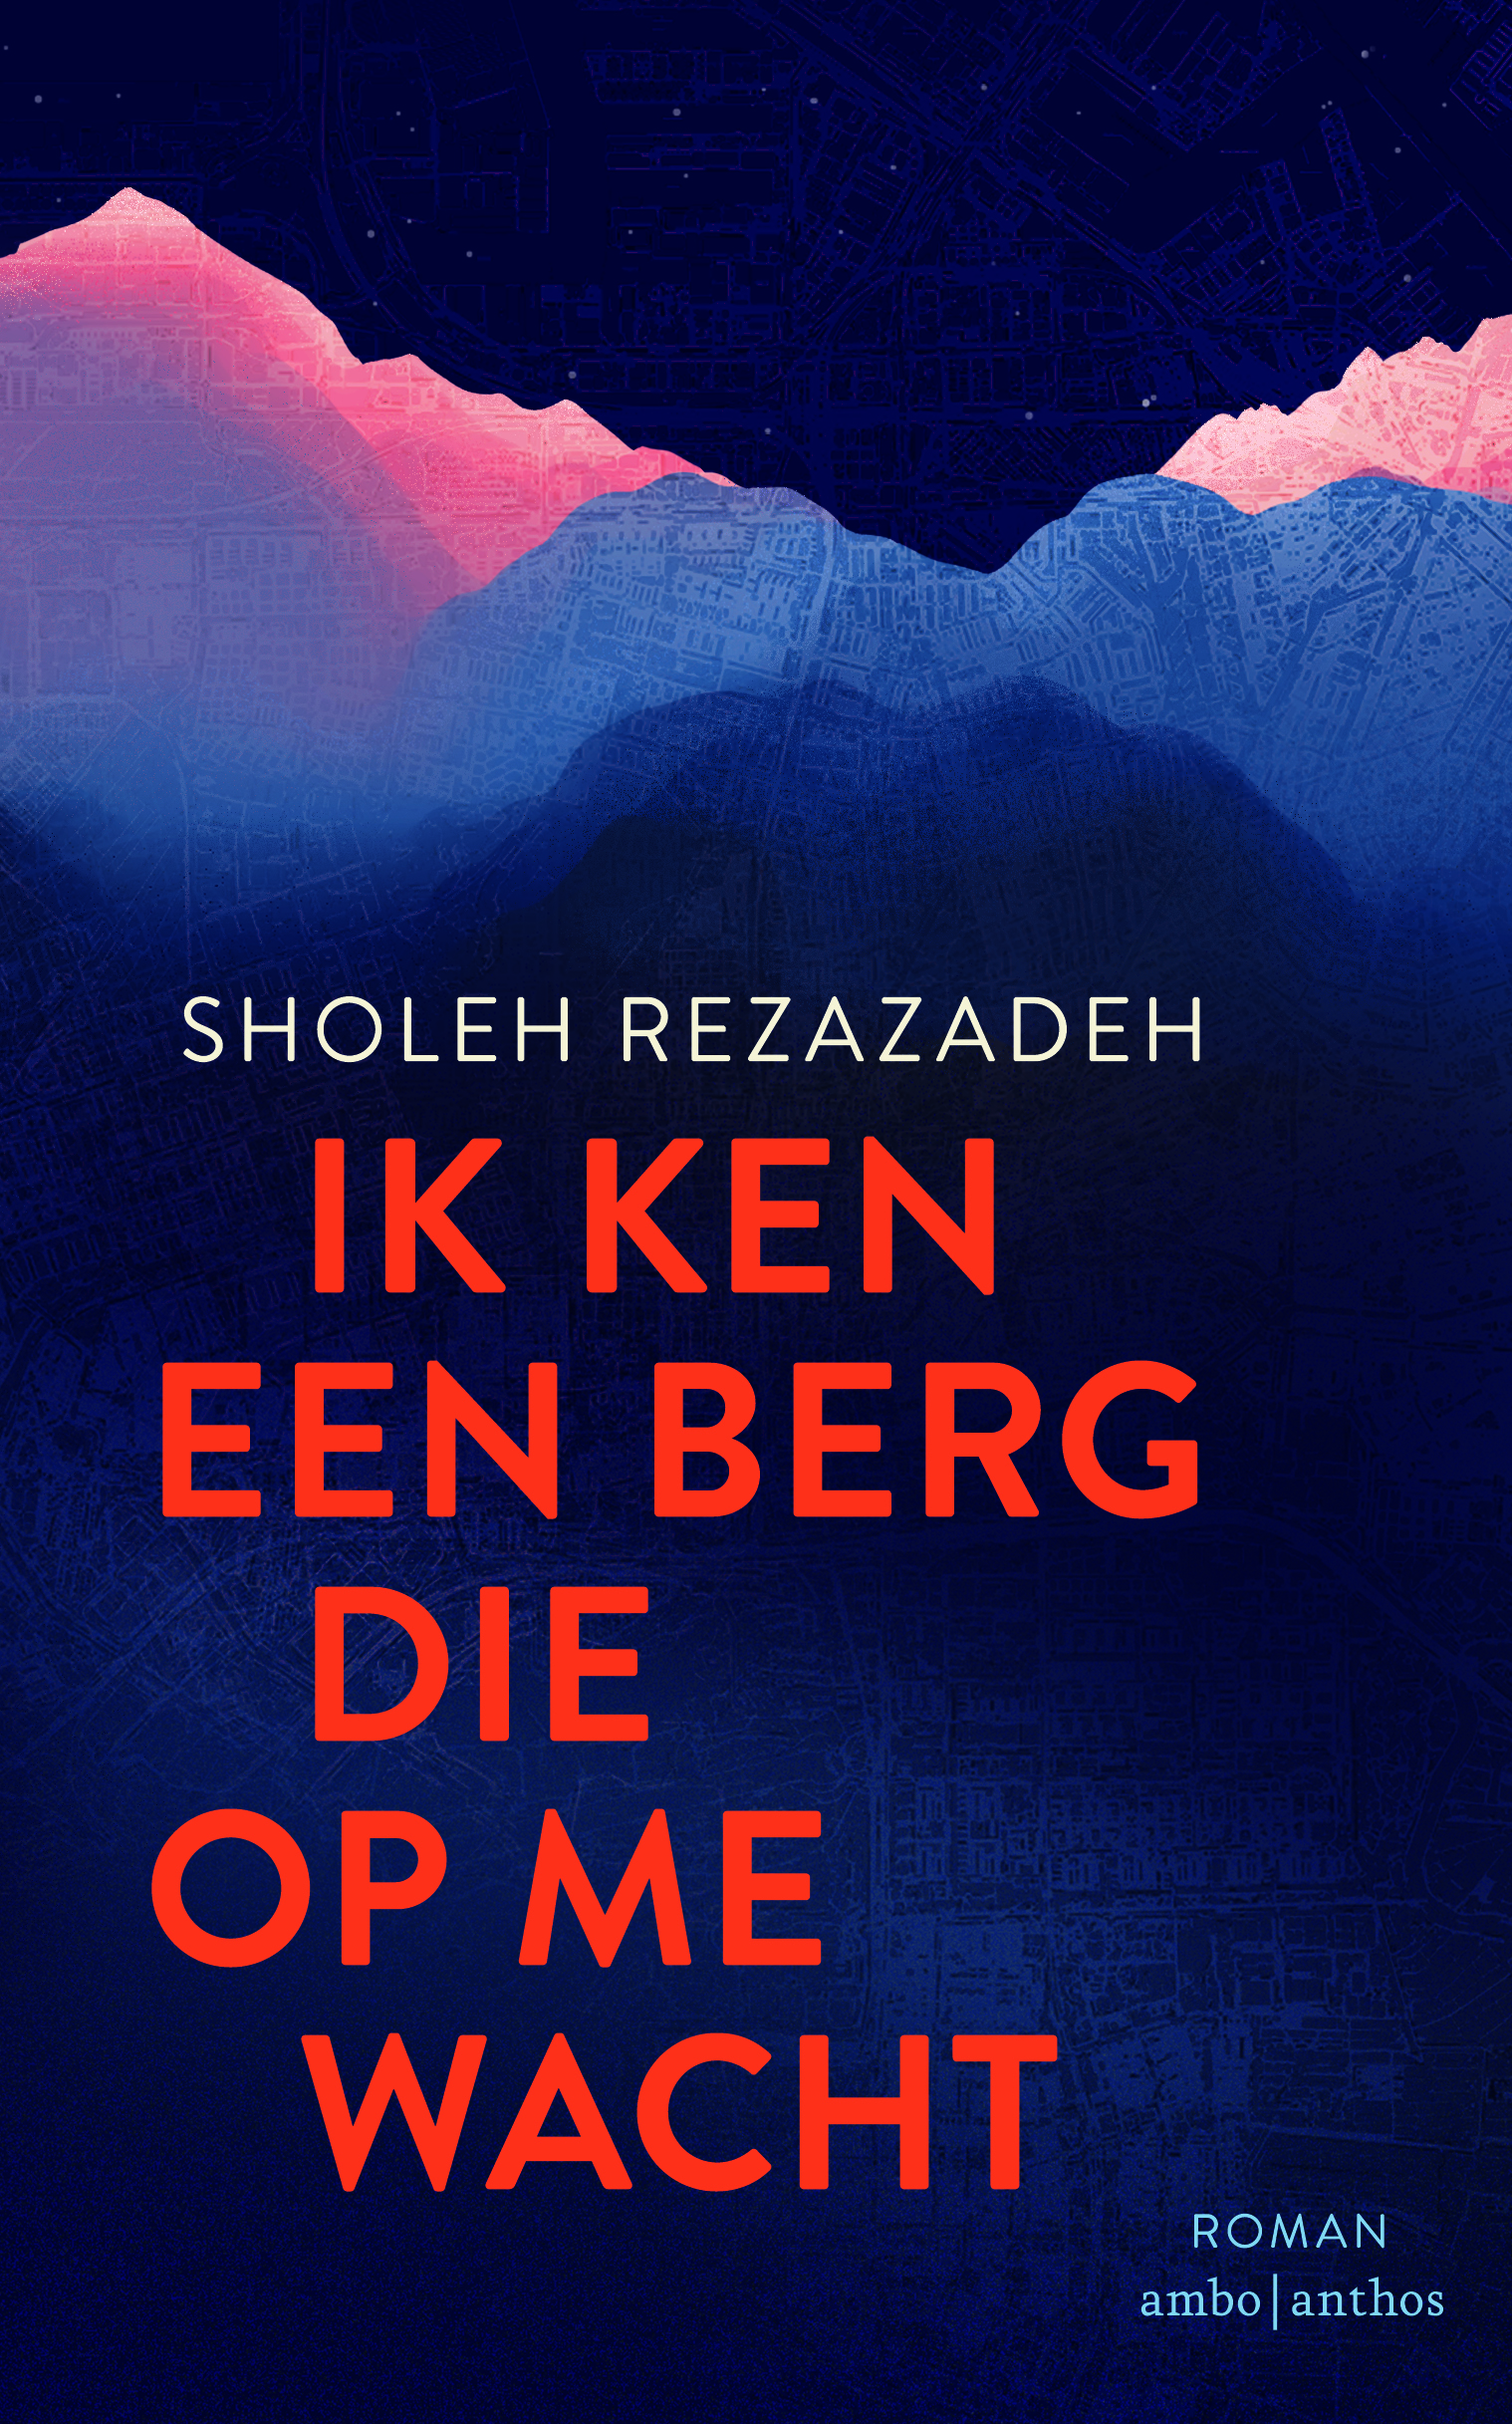 Image of the author's book cover.